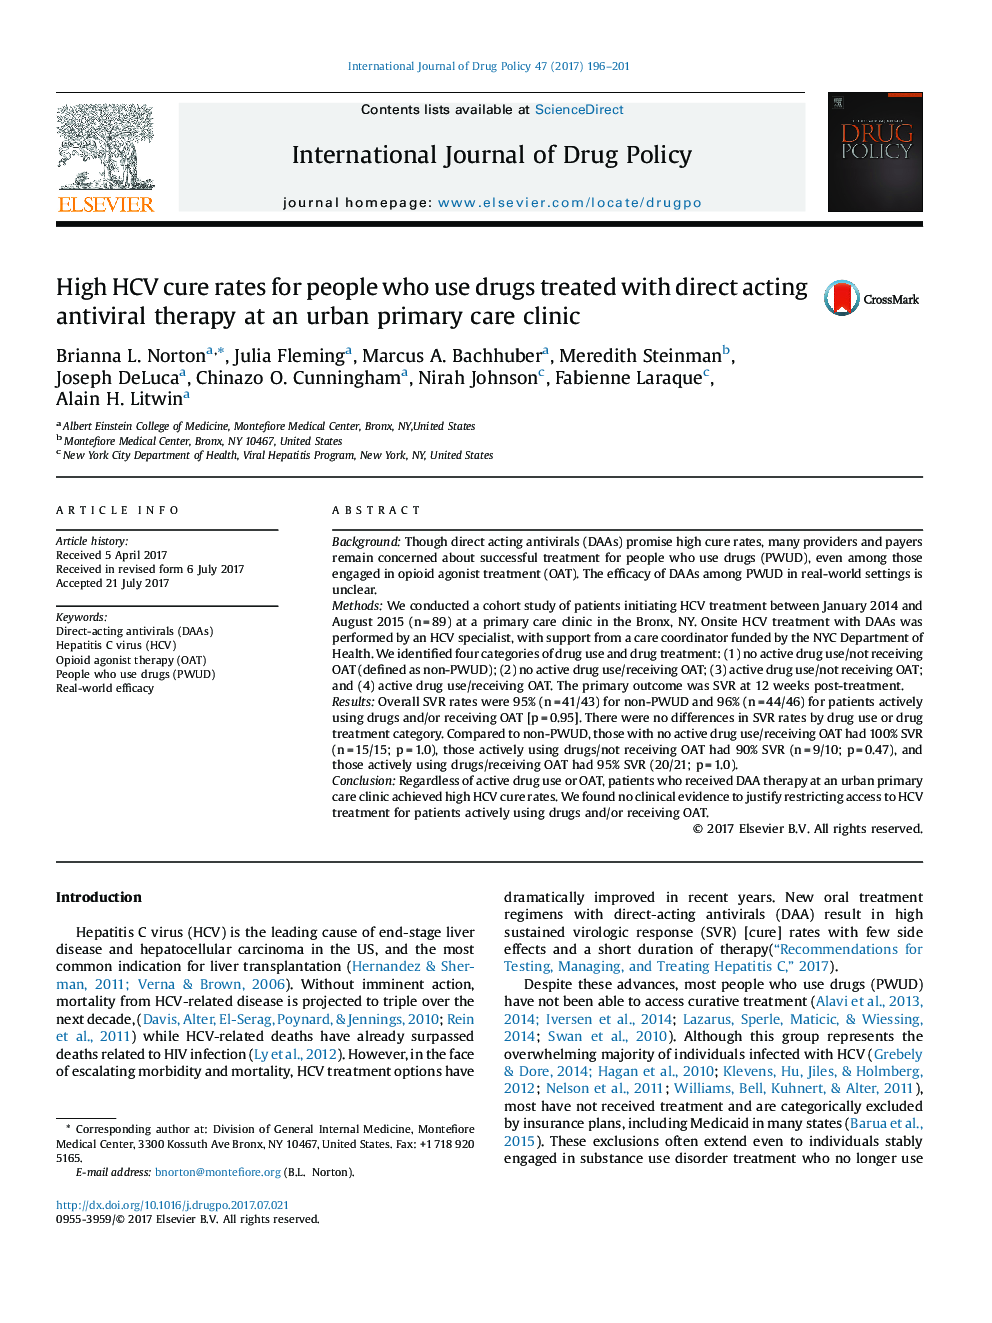 High HCV cure rates for people who use drugs treated with direct acting antiviral therapy at an urban primary care clinic